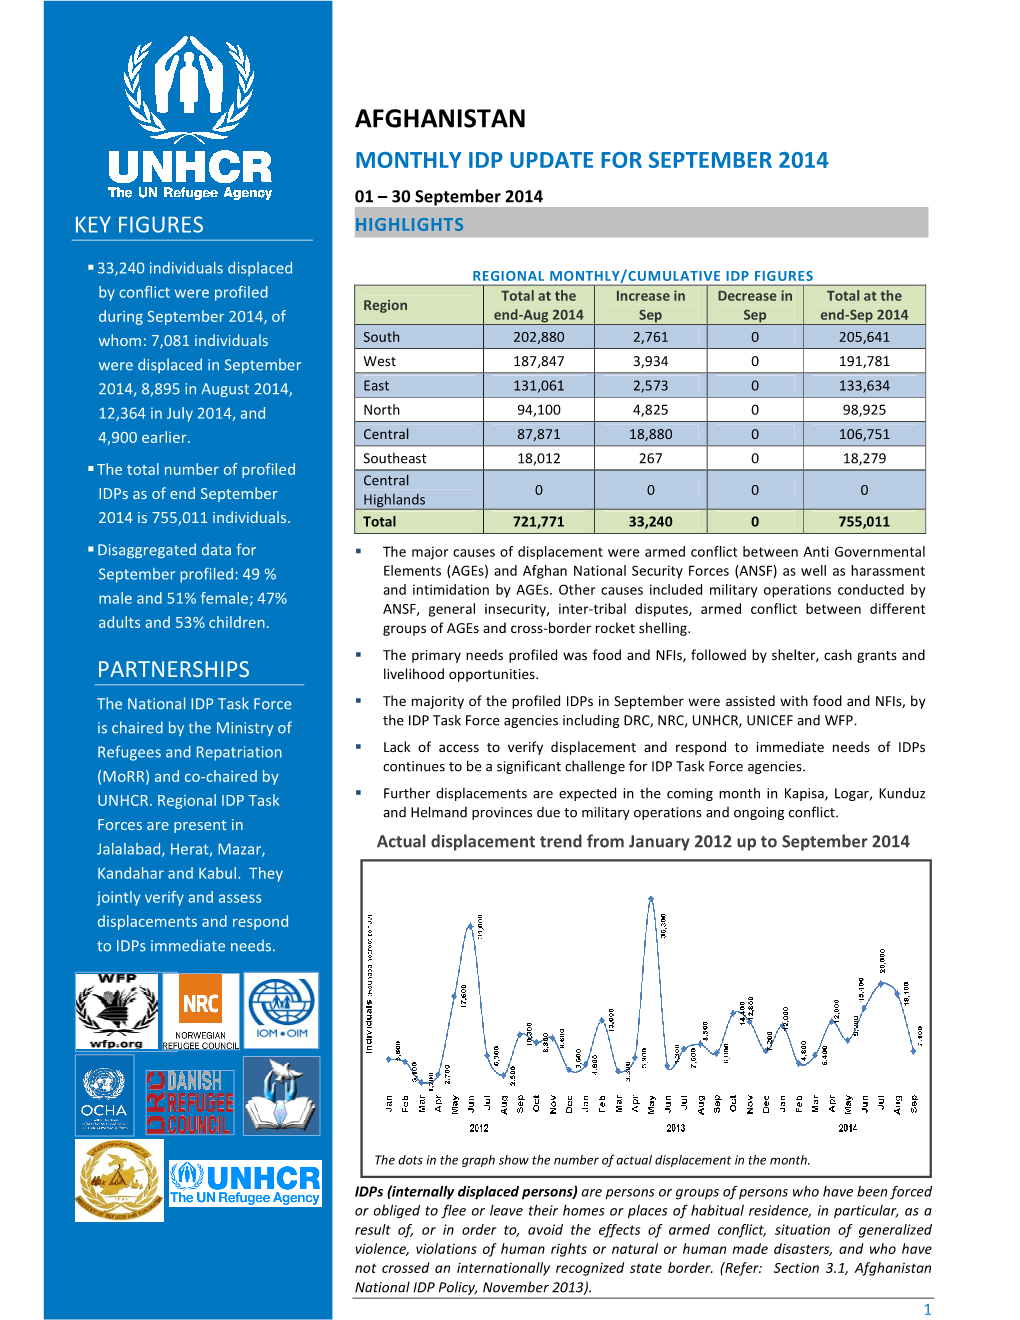 Afghanistan Monthly Idp Update for September 2014